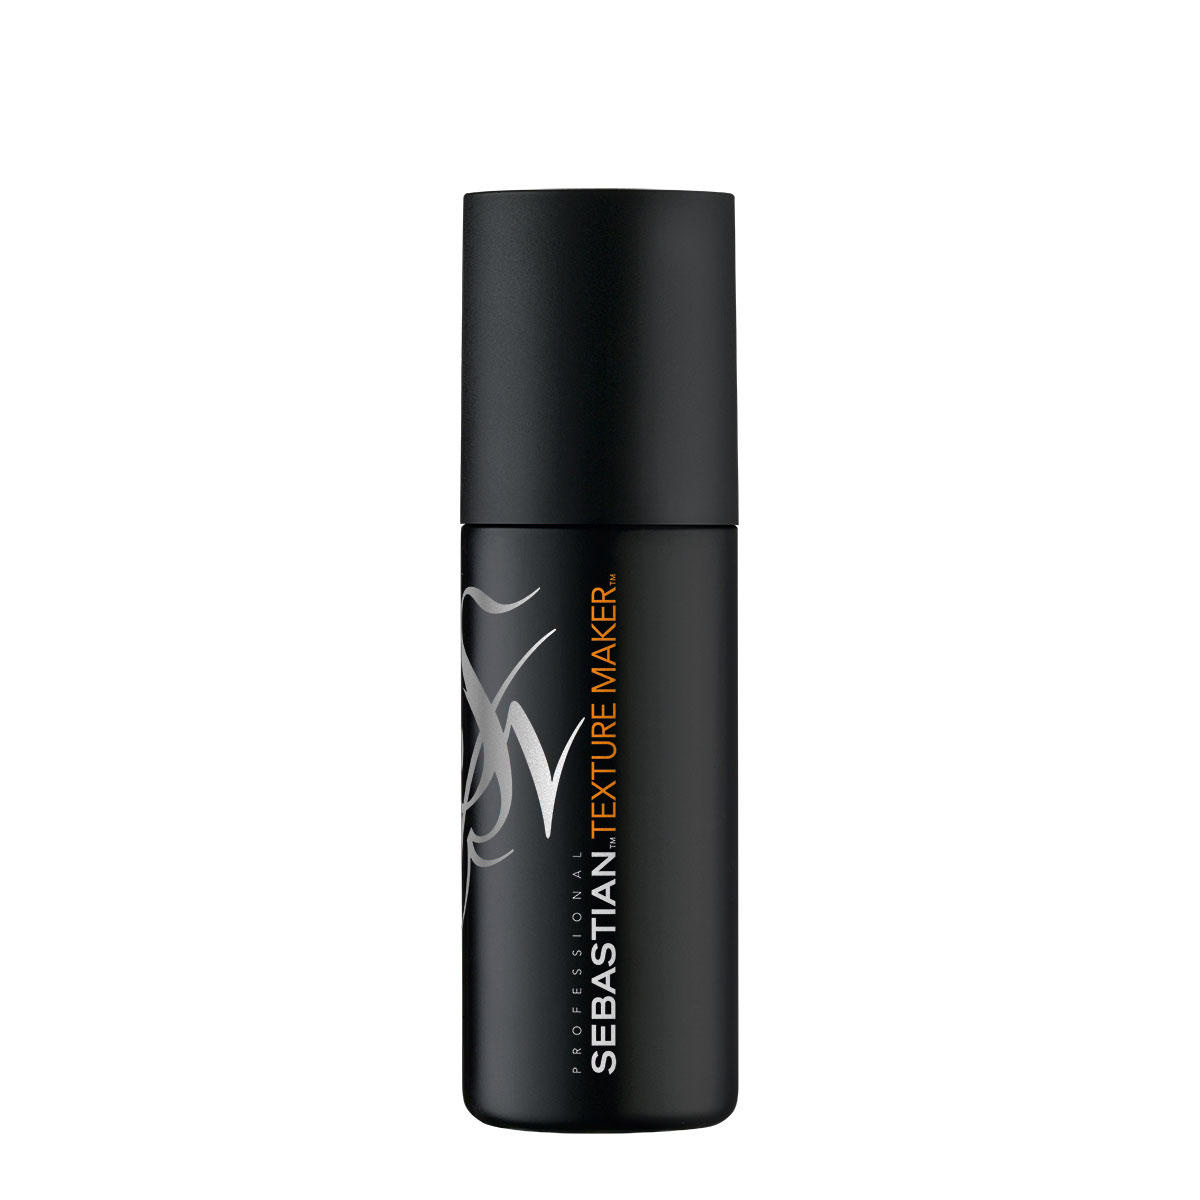 Paul Mitchell Fast Drying Sculpting Spray Travel Size